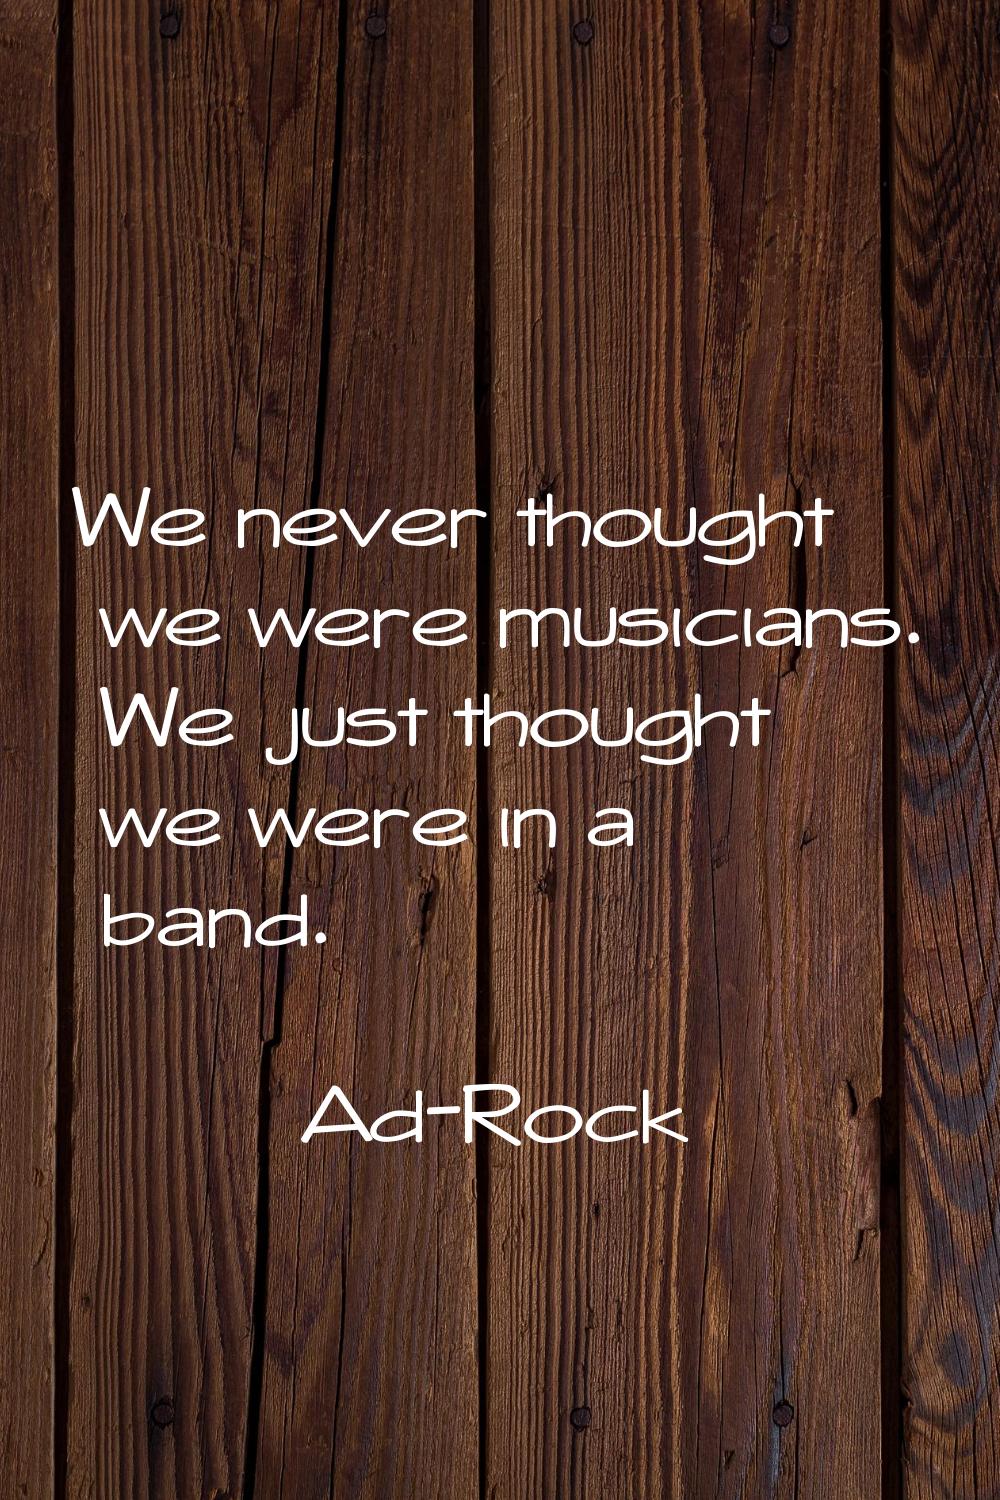 We never thought we were musicians. We just thought we were in a band.